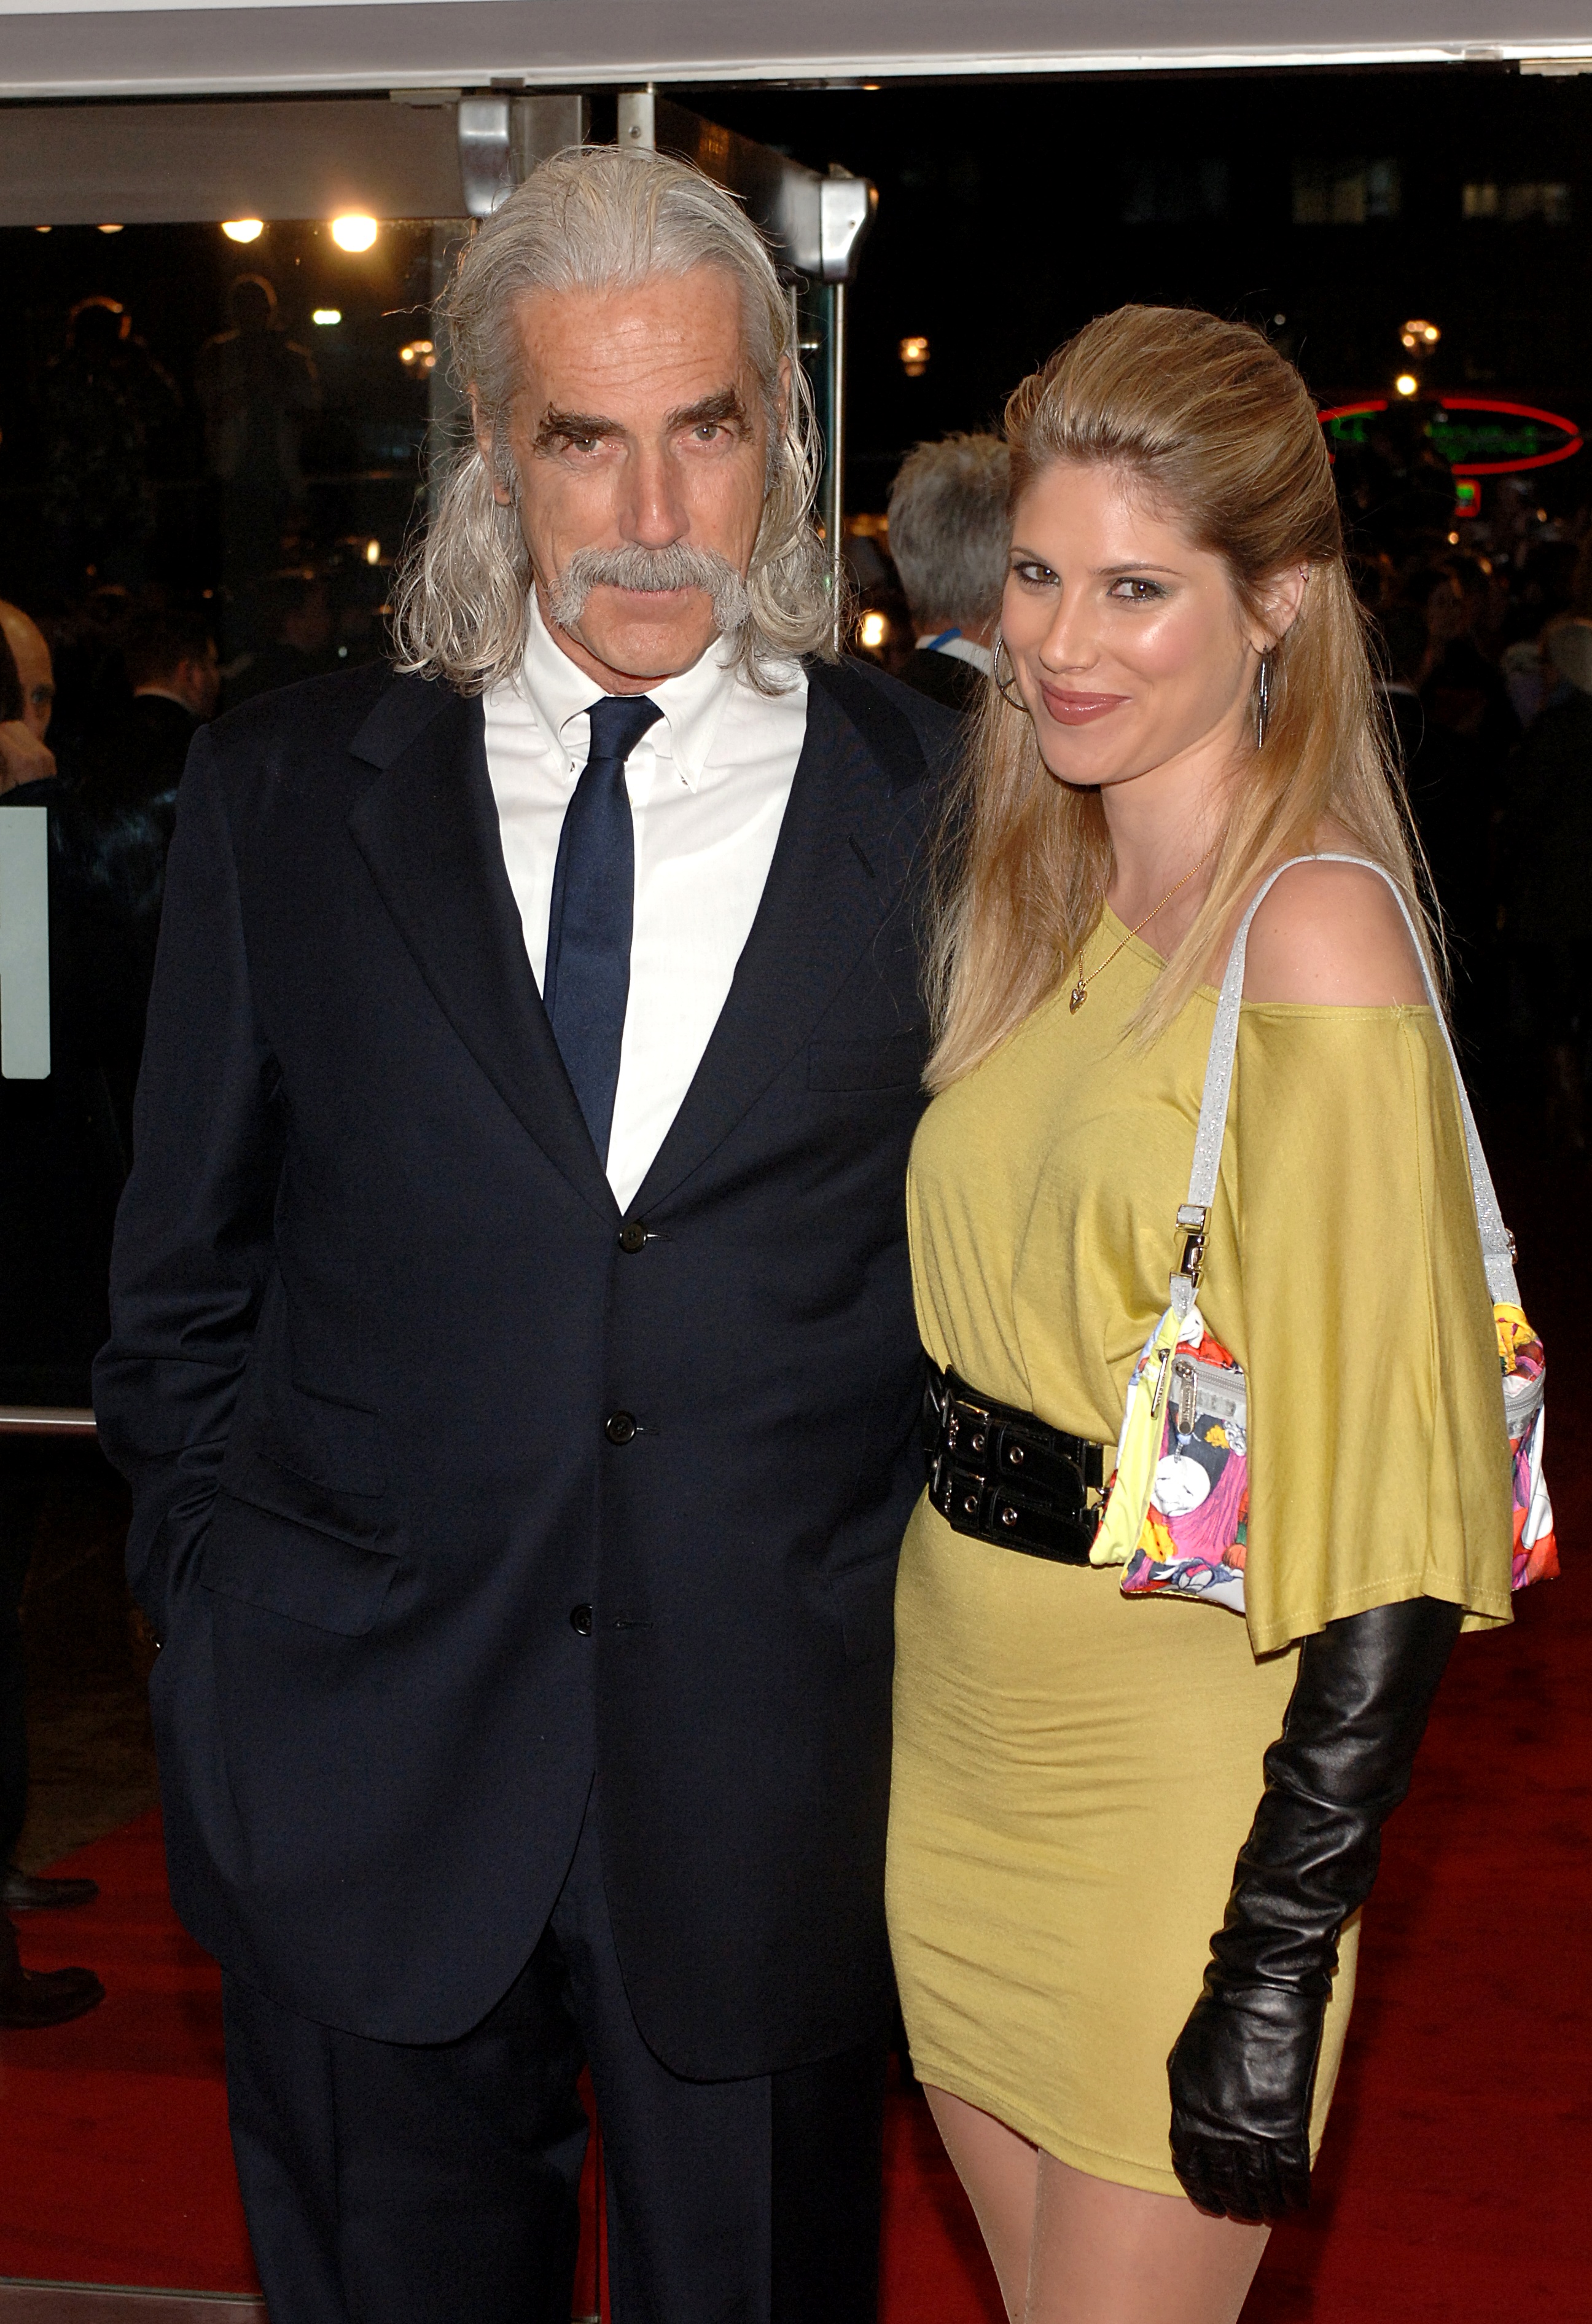 Sam Elliott and his daughter Cleo Rose at the premiere of "The Golden Compass" in Leicester Square, London, on November 27, 2007 | Source: Getty Images